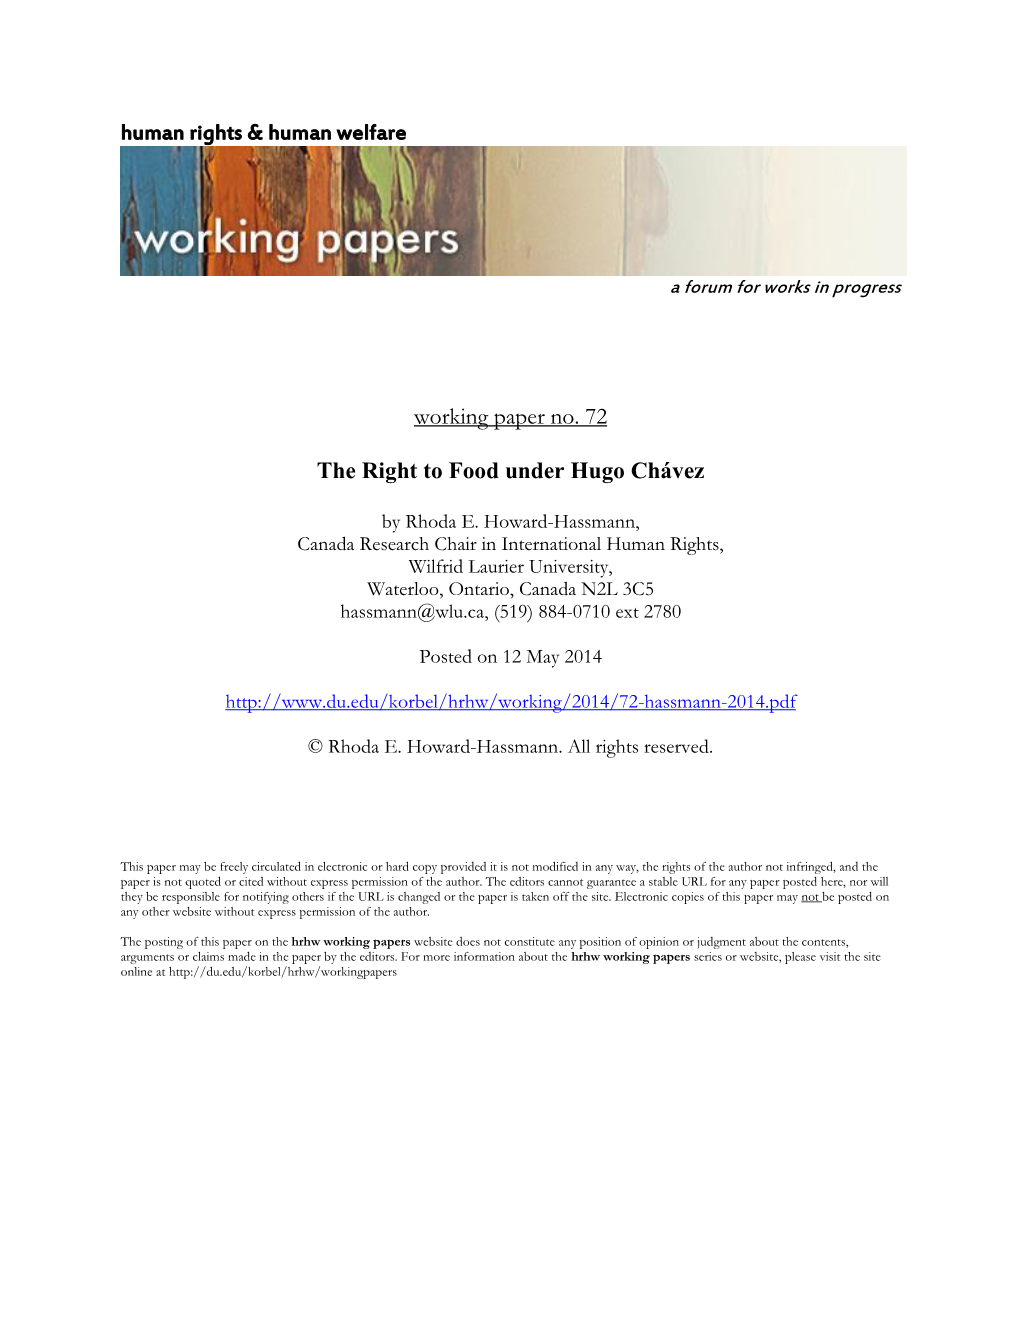 Working Paper No. 72 the Right to Food Under Hugo Chávez